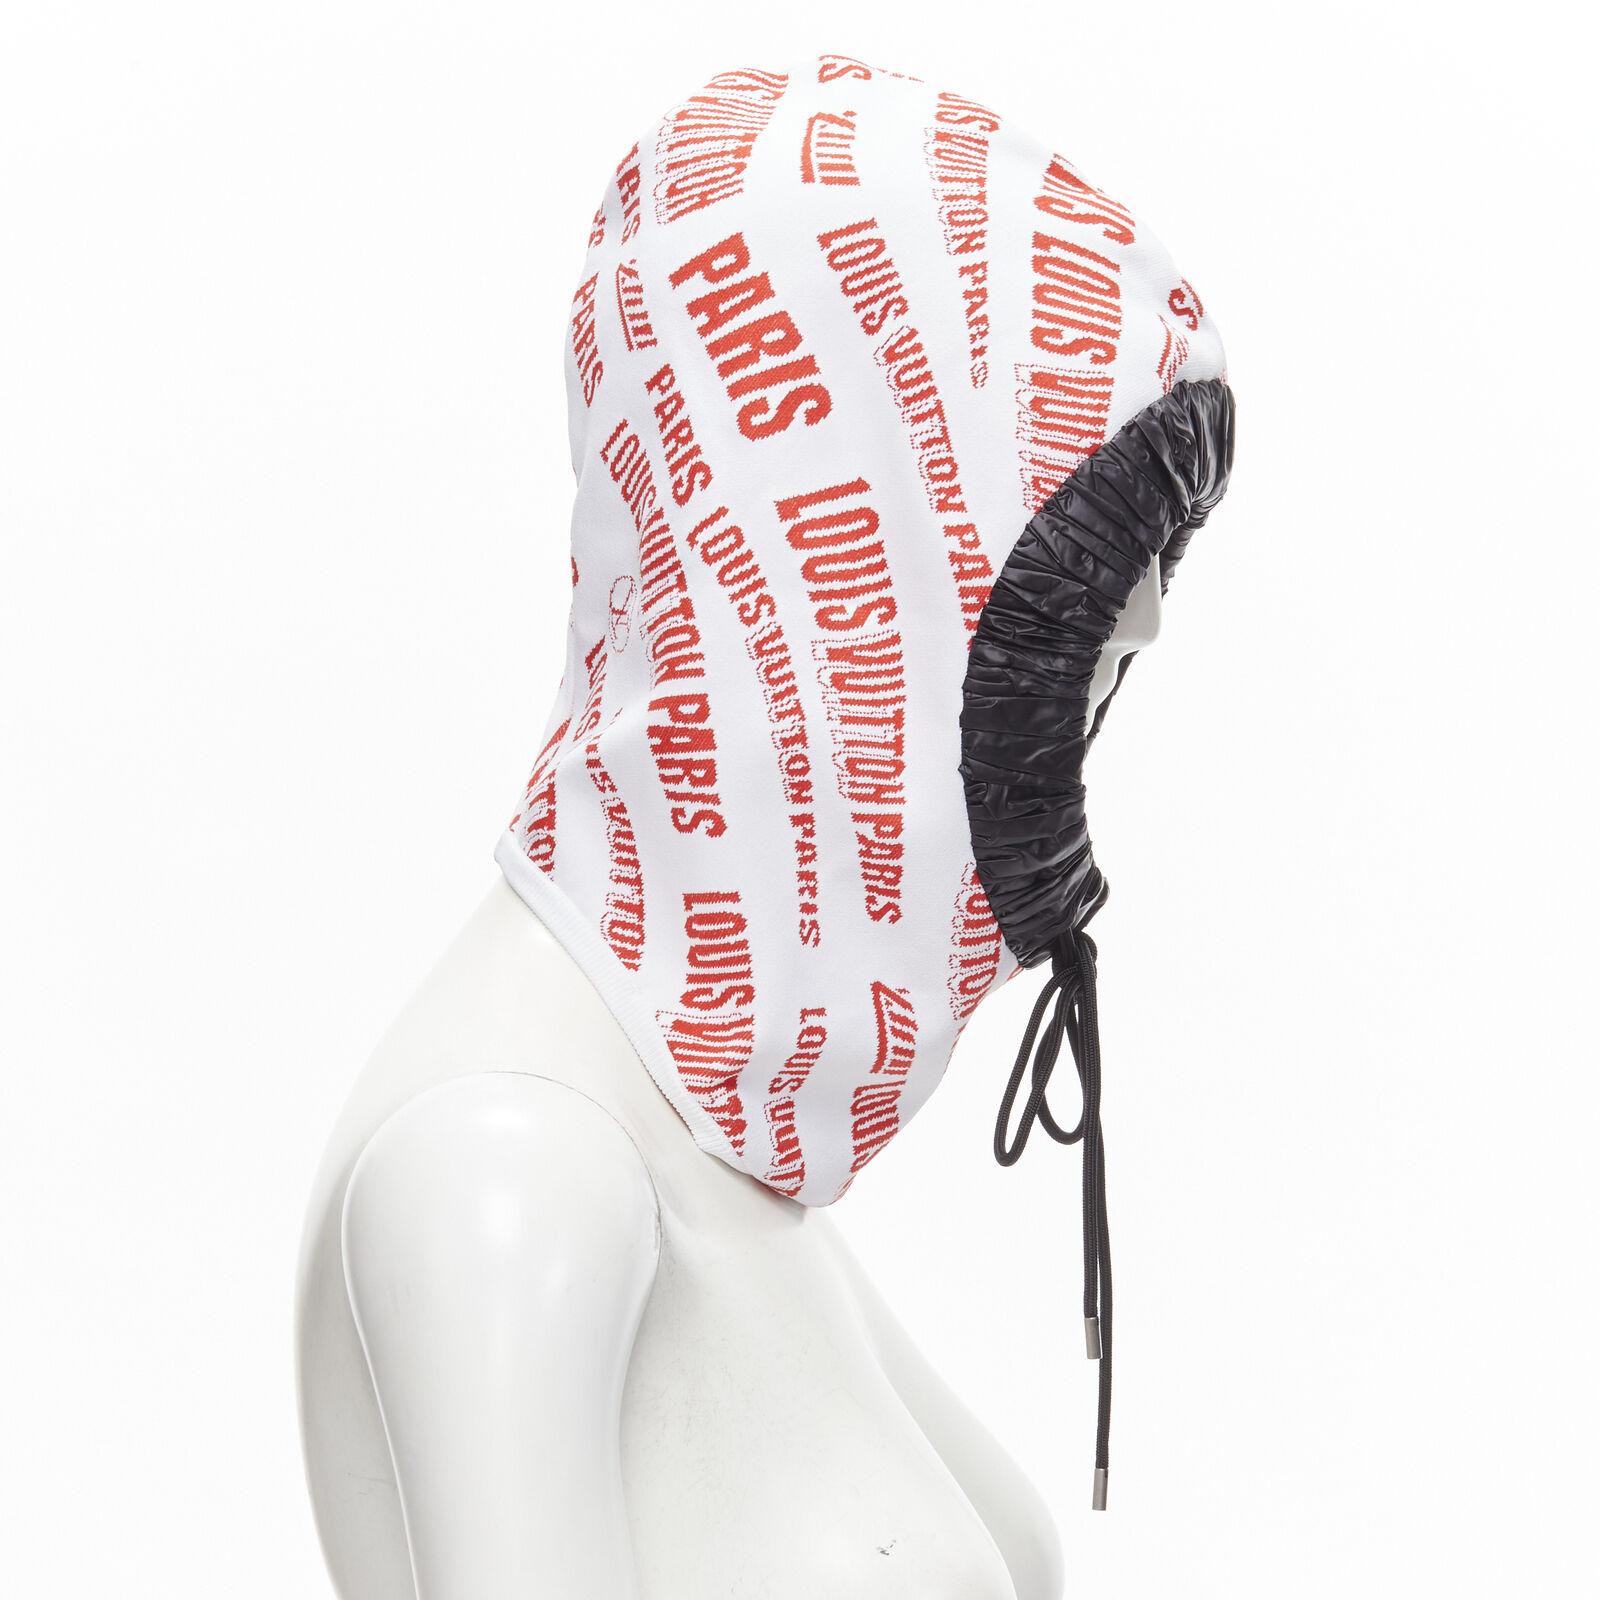 LOUIS VUITTON FORNASETTI 2021 white red logo jacquard nylon trim snood hood hat In Excellent Condition For Sale In Hong Kong, NT